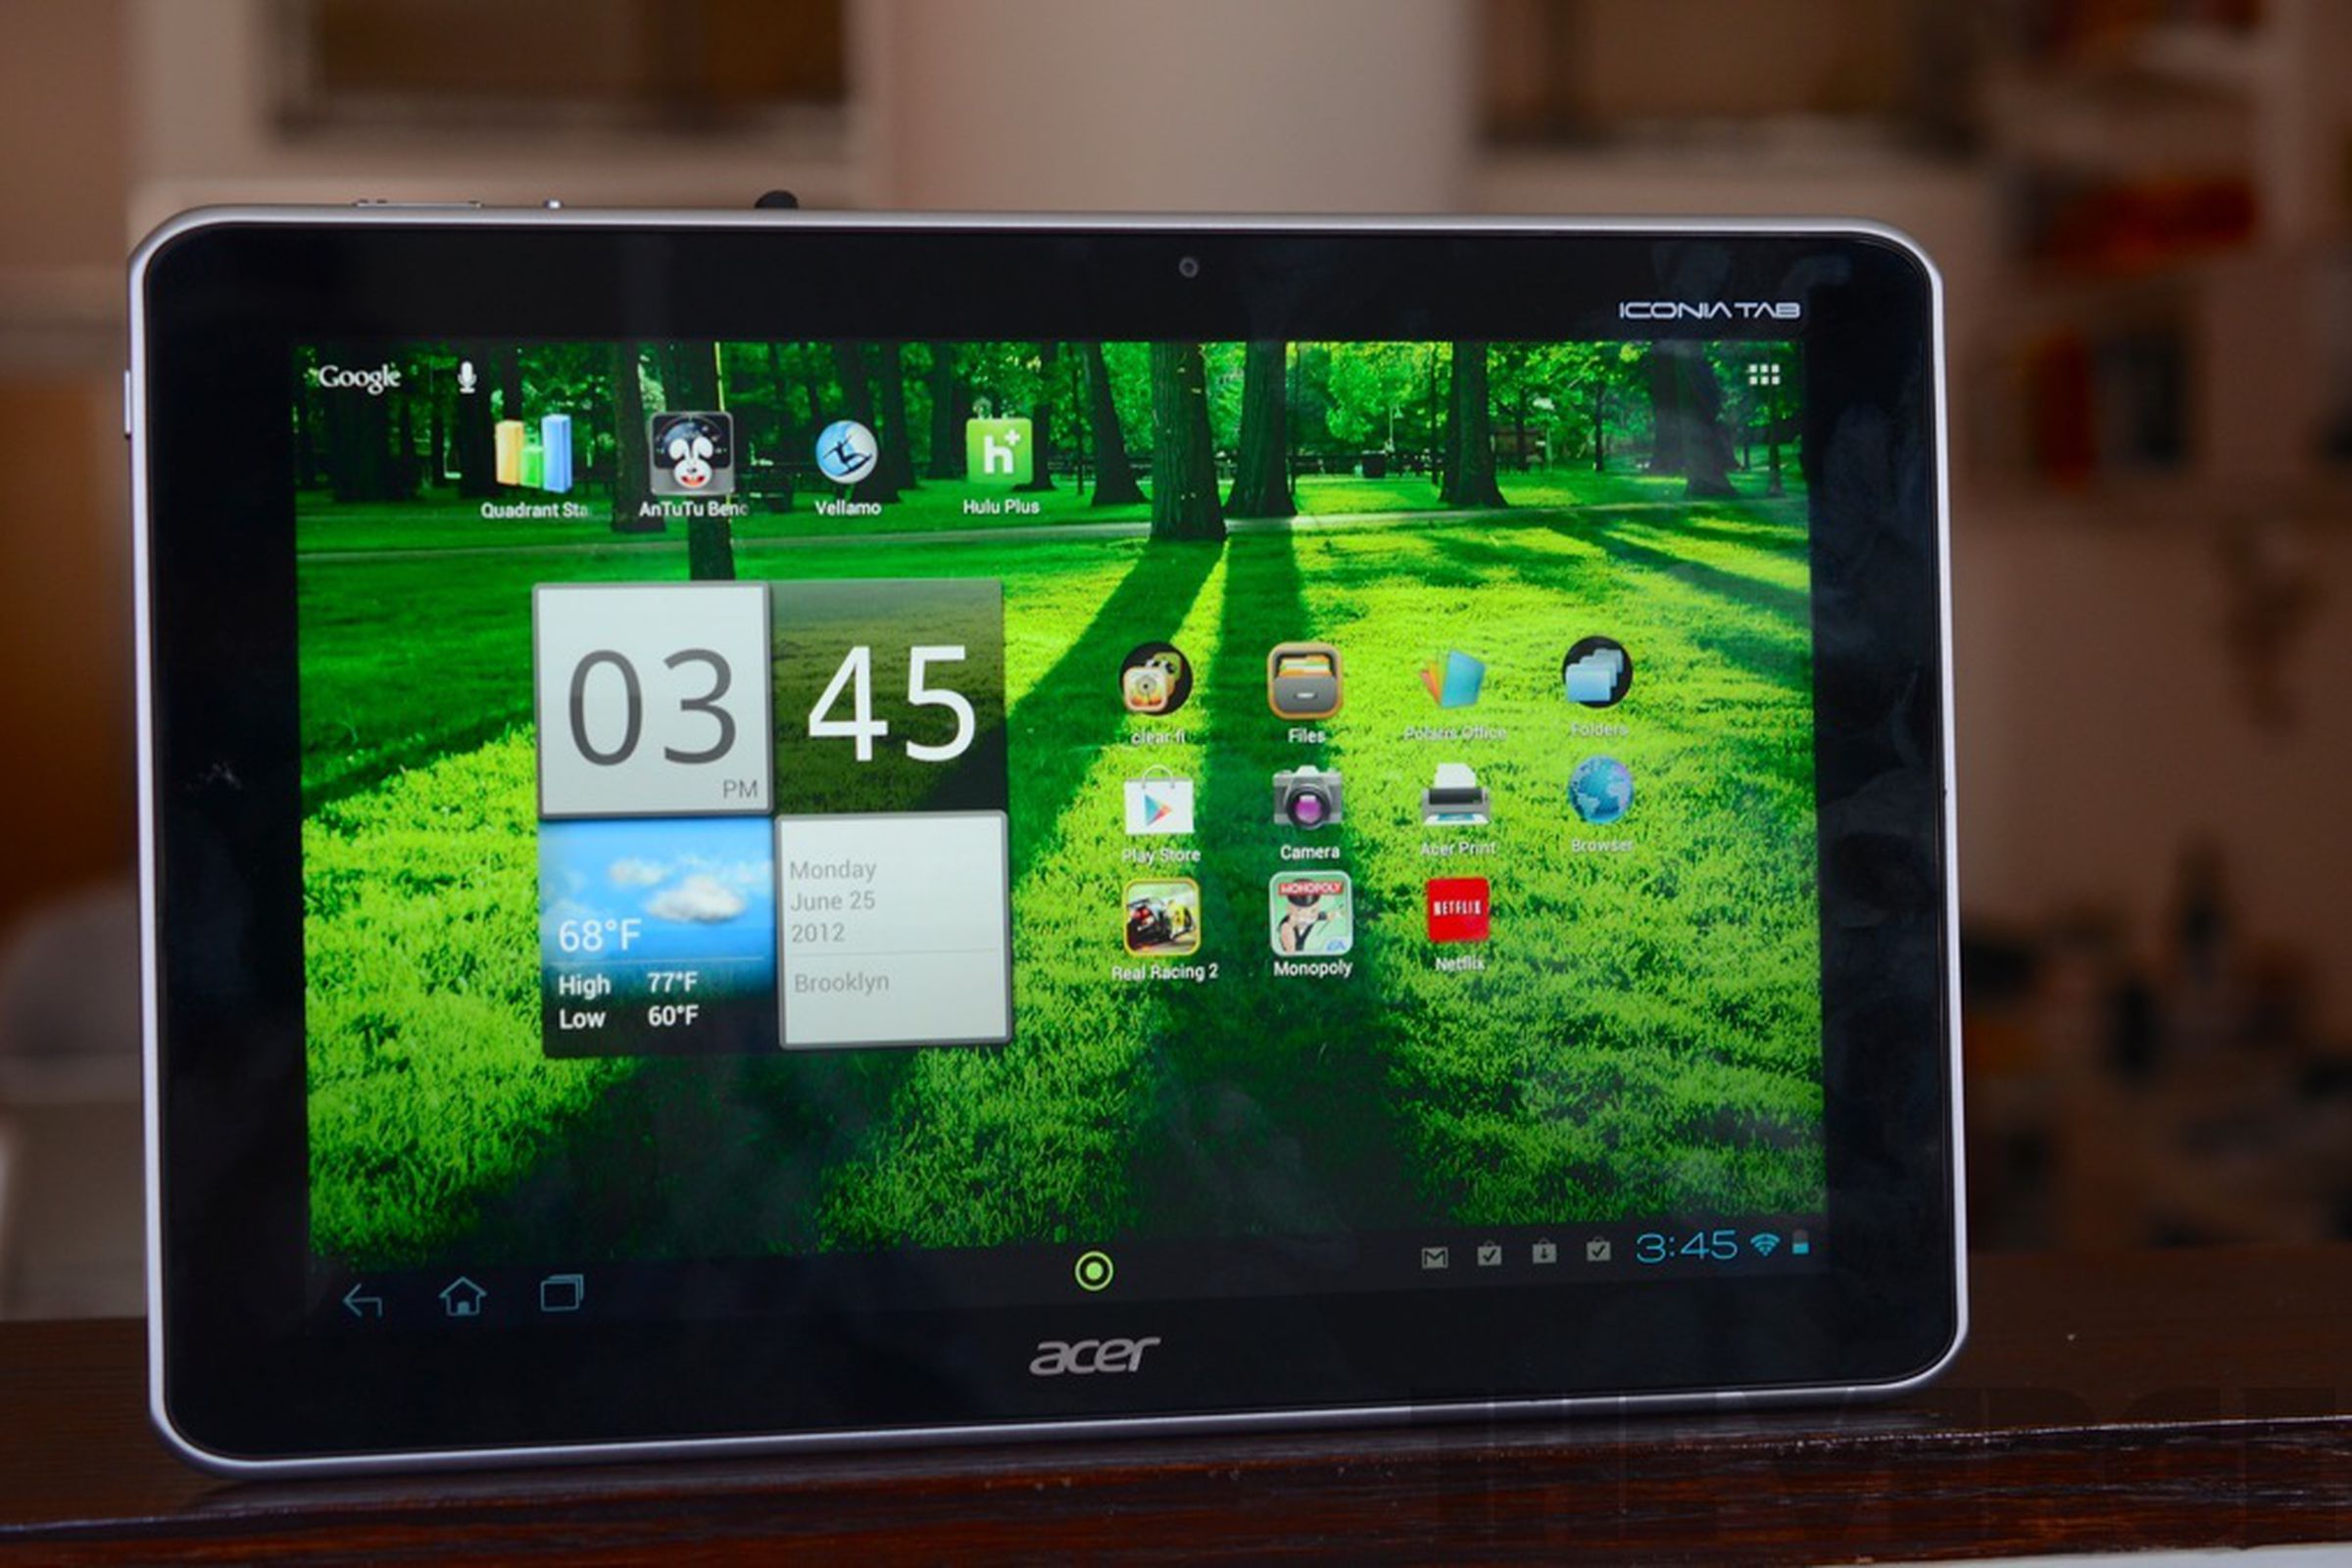 Acer A700 hero2 (1024px)